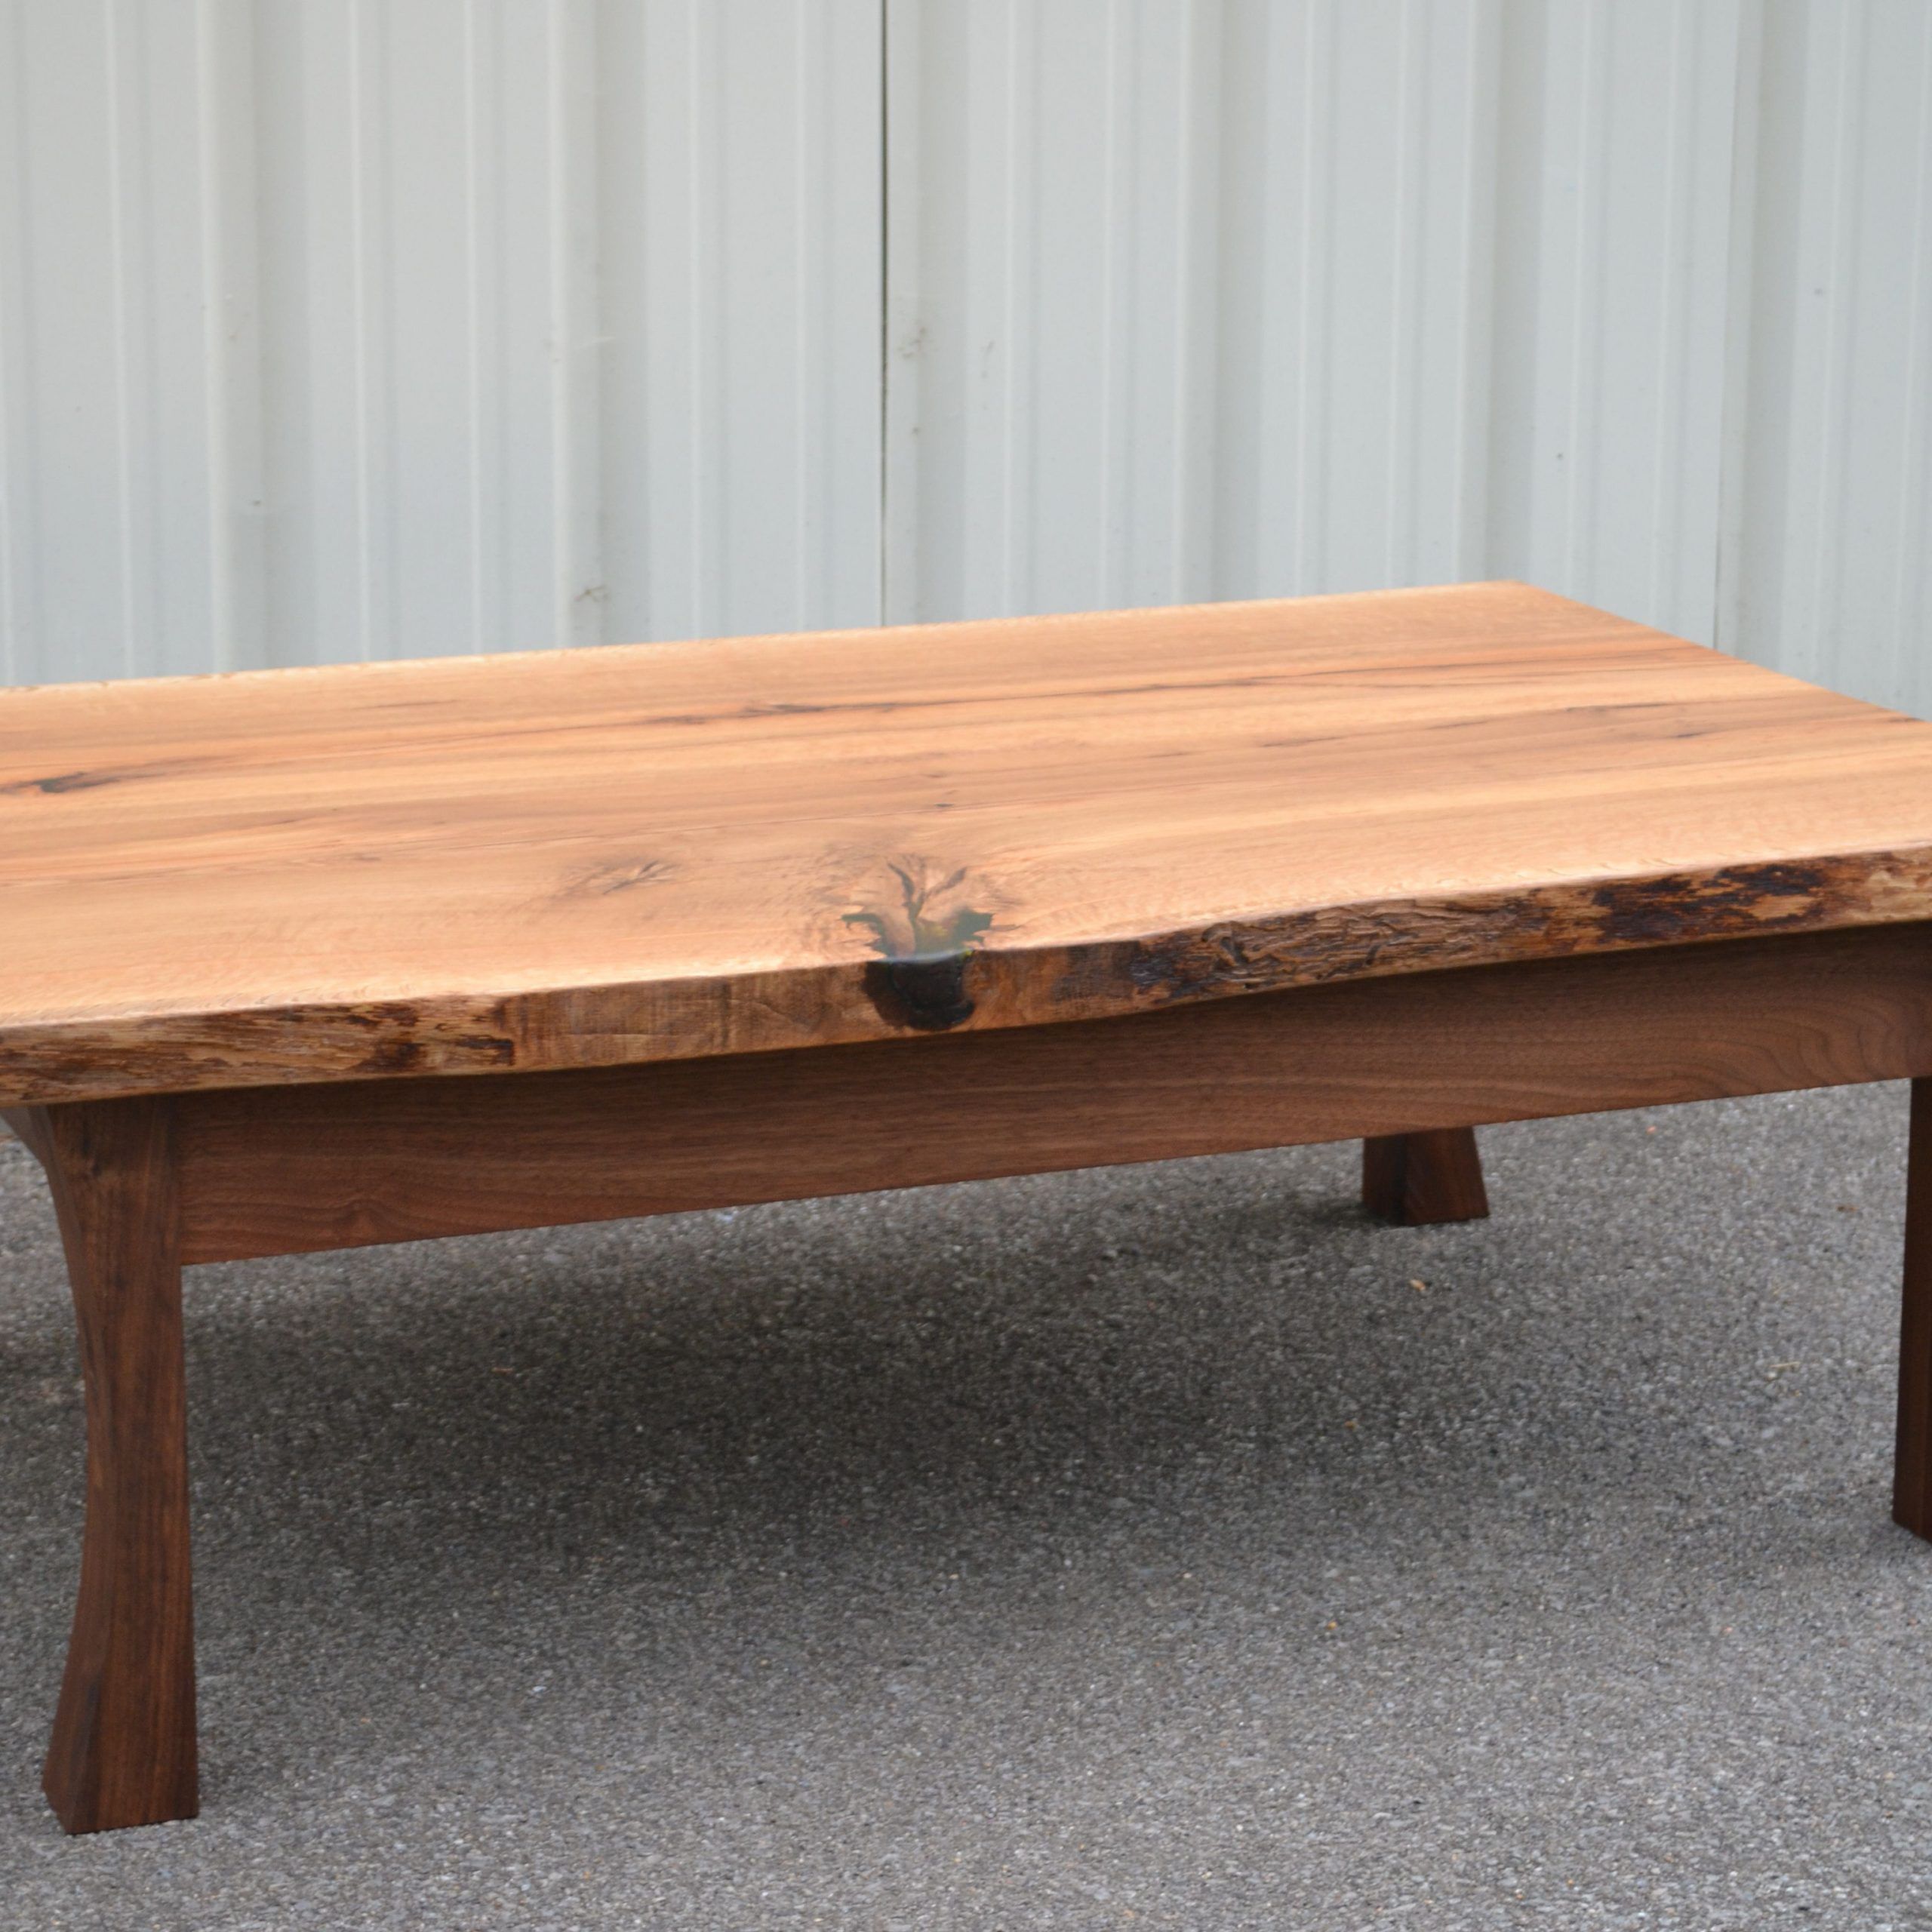 Widely Used Rustic Oak And Black Coffee Tables With Regard To The Unique Rustic Coffee Tables For Sale (View 2 of 20)